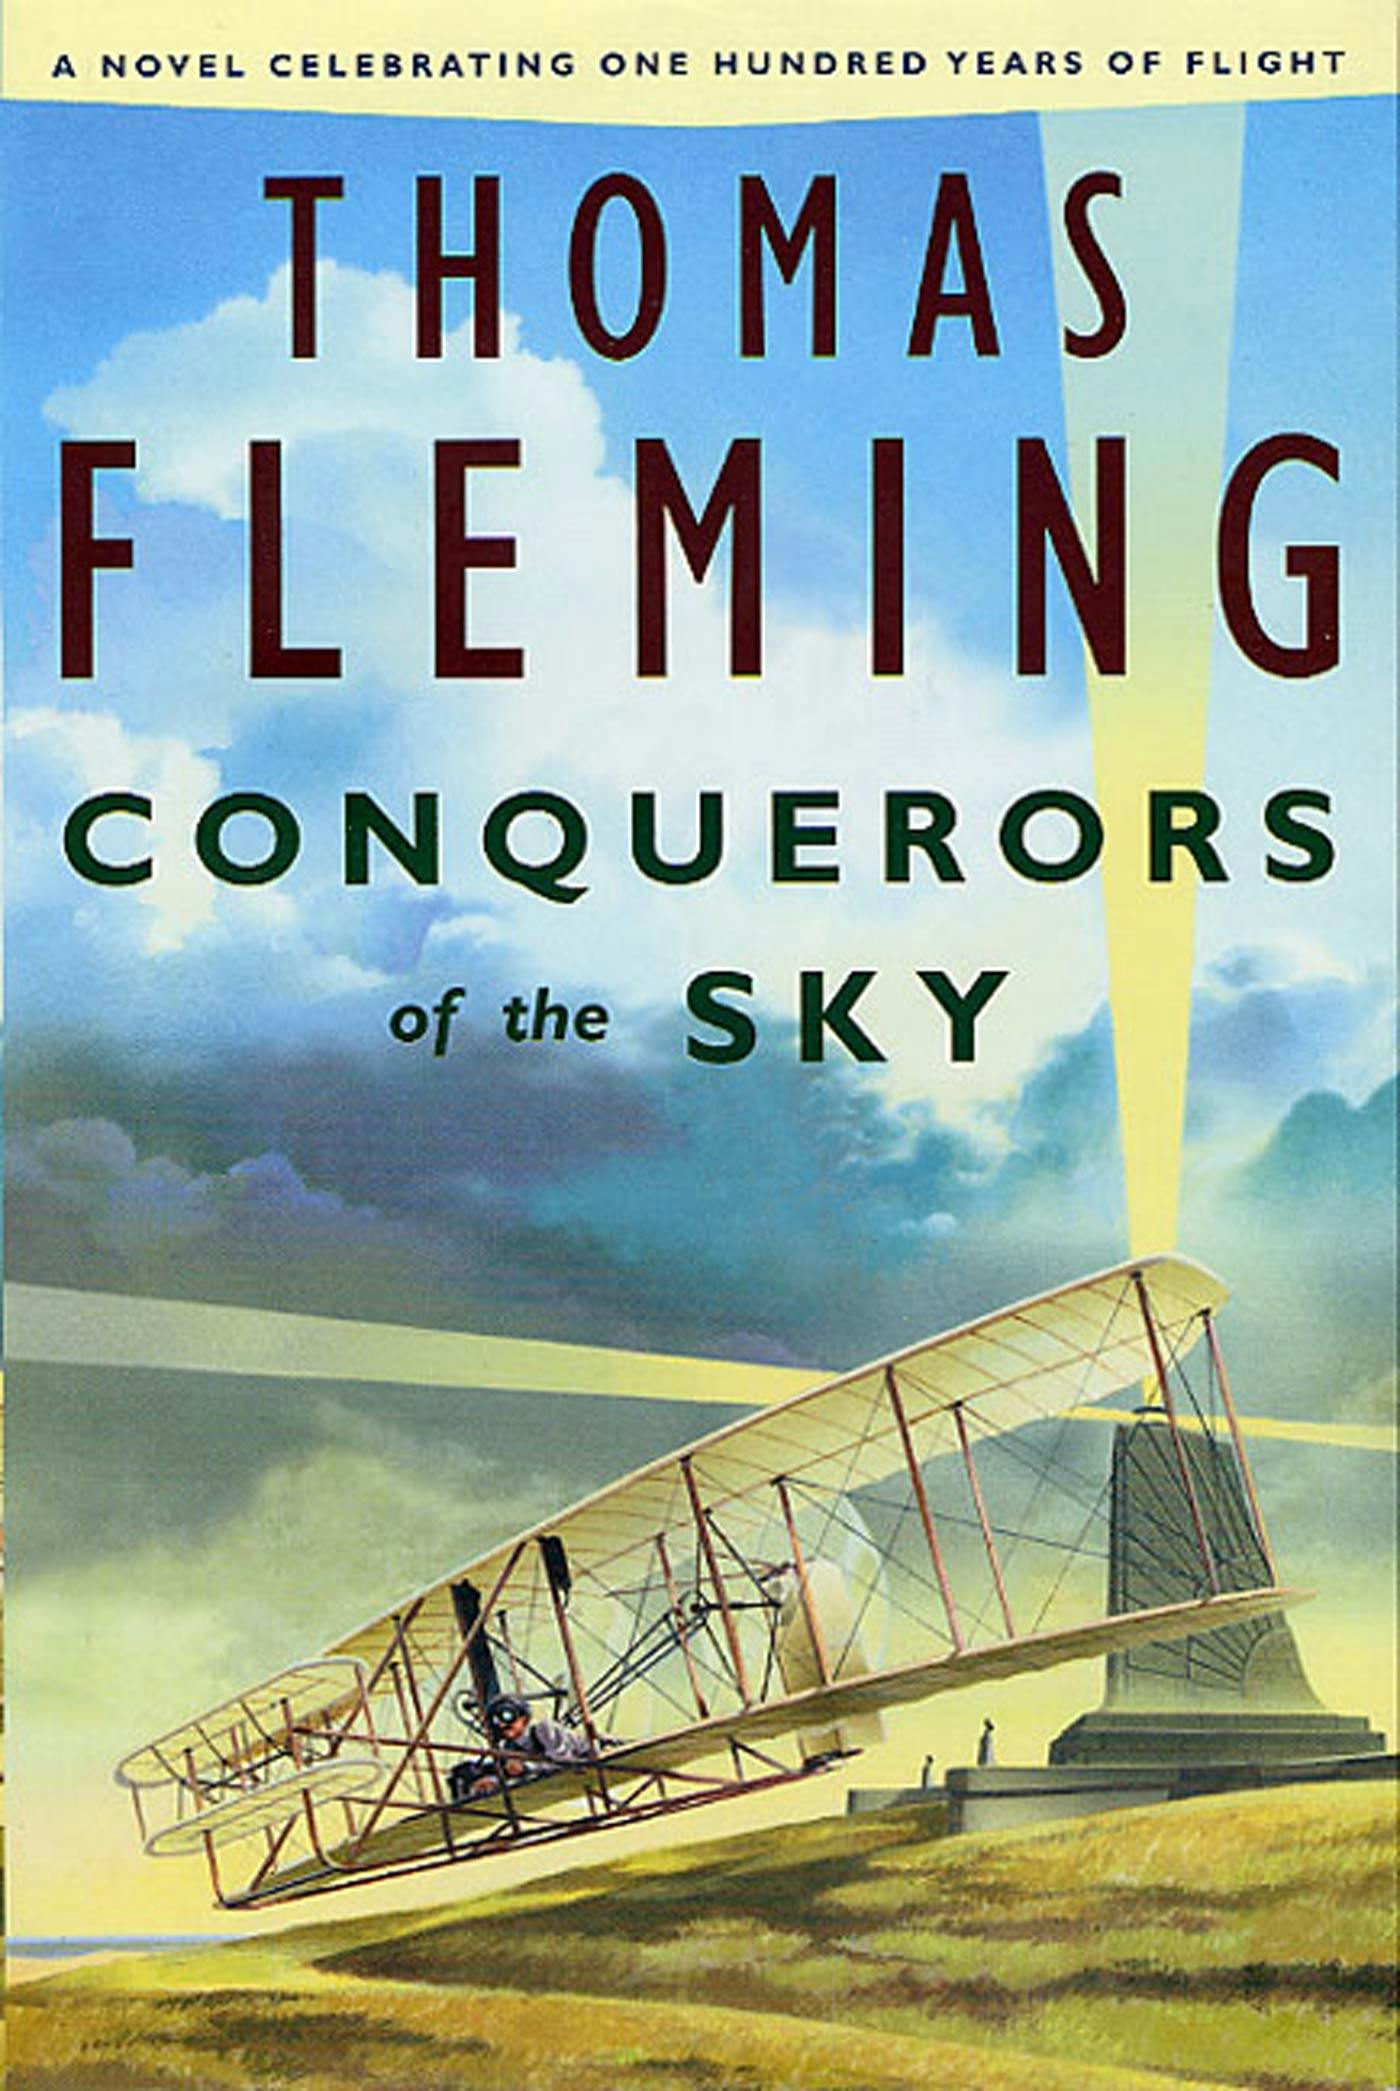 Cover for the book titled as: Conquerors of the Sky